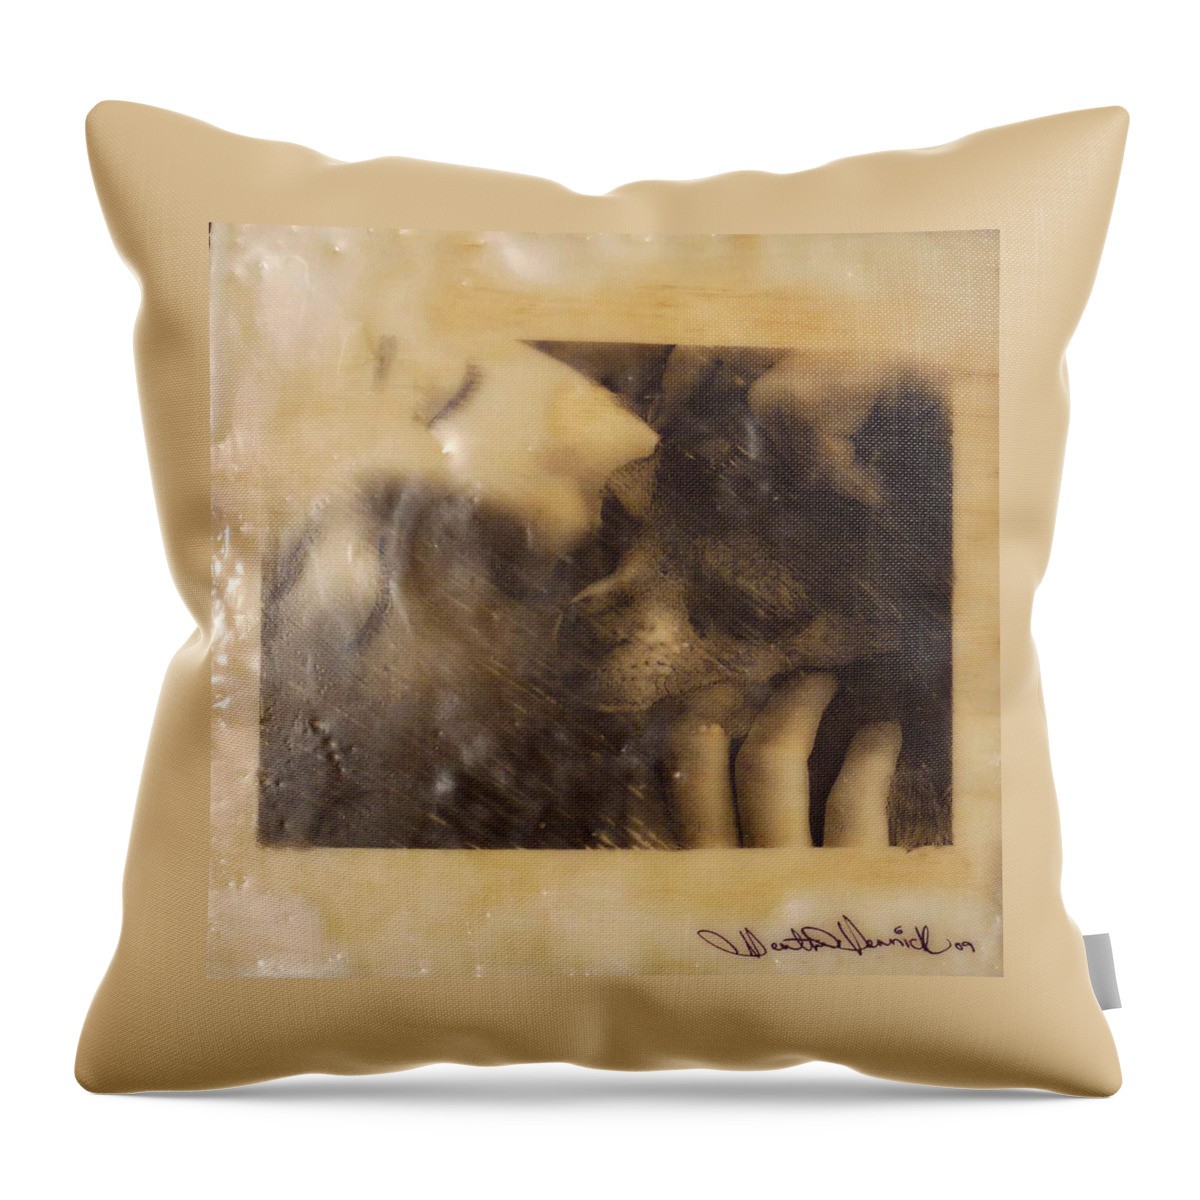  Throw Pillow featuring the photograph Pet Therapy Encaustic by Heather Hennick